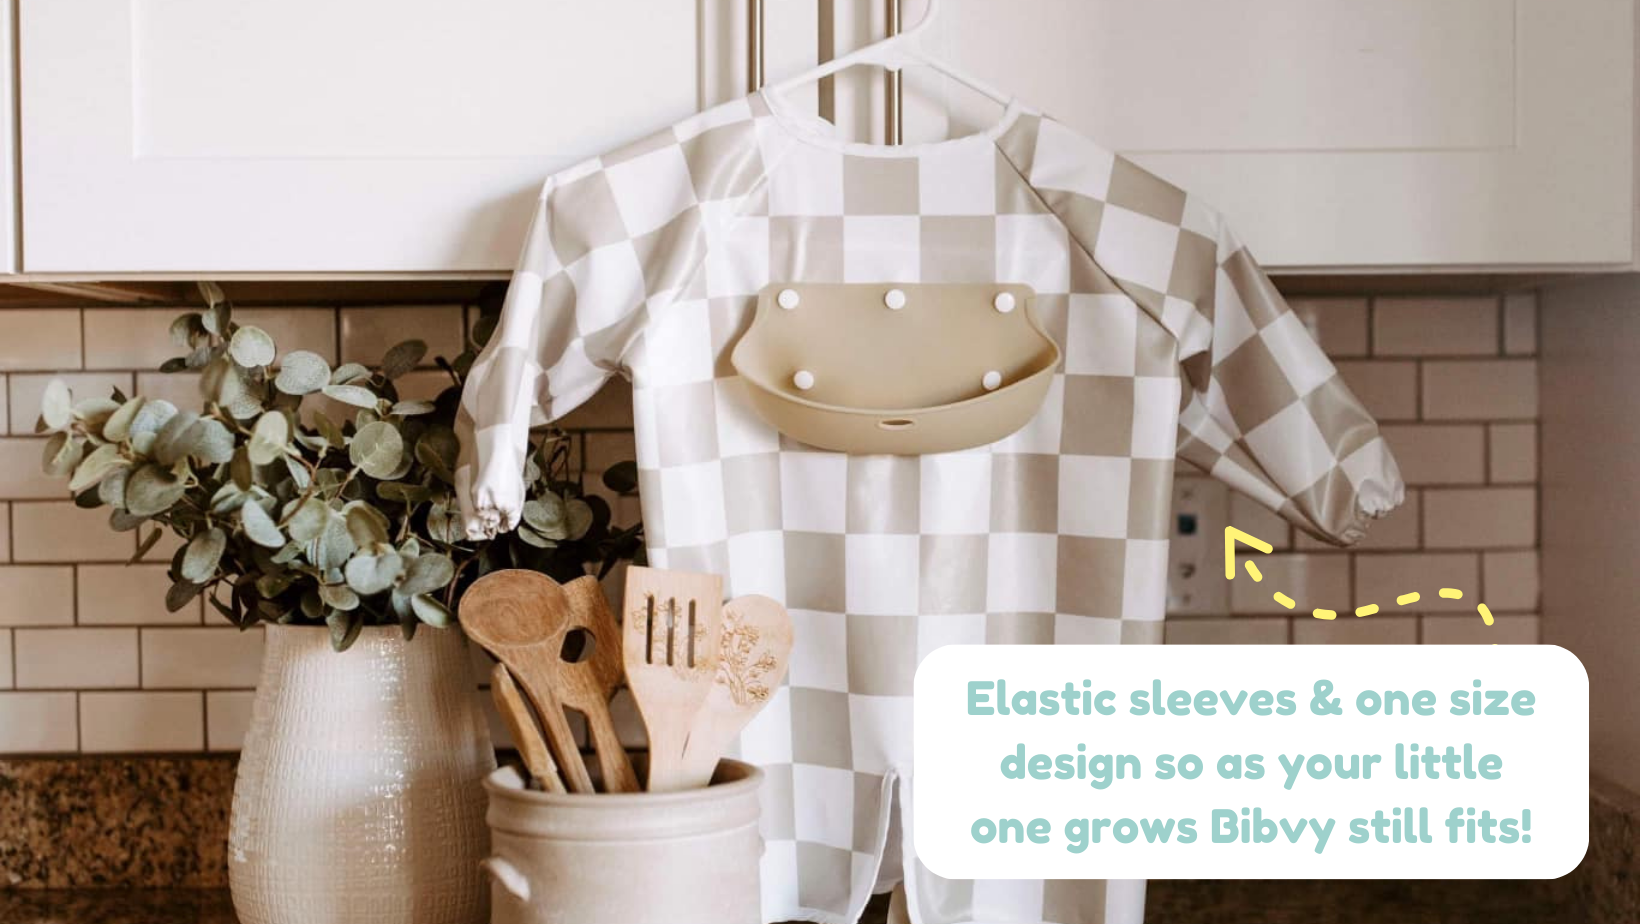 Bibvy's adjustable one-size bib with elastic sleeves showcased in a kitchen, emphasizing that it grows with your child.